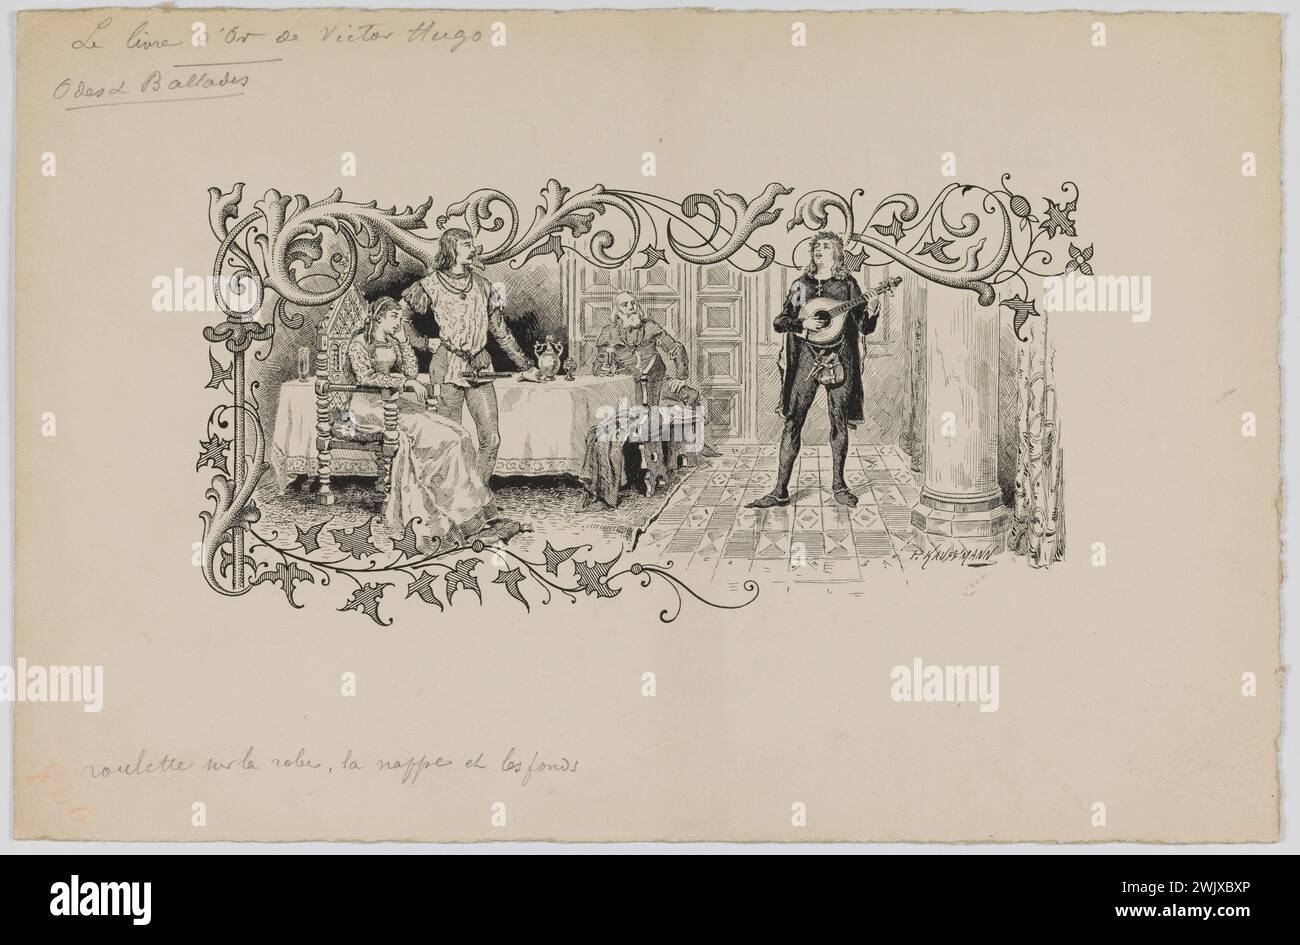 Paul Adolphe Kauffmann (Peka, 1849-1940). 'Title vignette for the chapter' Odes et Ballades '. Illustration for the' Golden Book of Victor Hugo '. Ink on paper. 1882. Paris, house of Victor Hugo. 102268-16 Song, singing, drawing, ink, woman, man, illustration of literary work, lute player, character, 19th XIX 19th 19th 19th 19th century Stock Photo